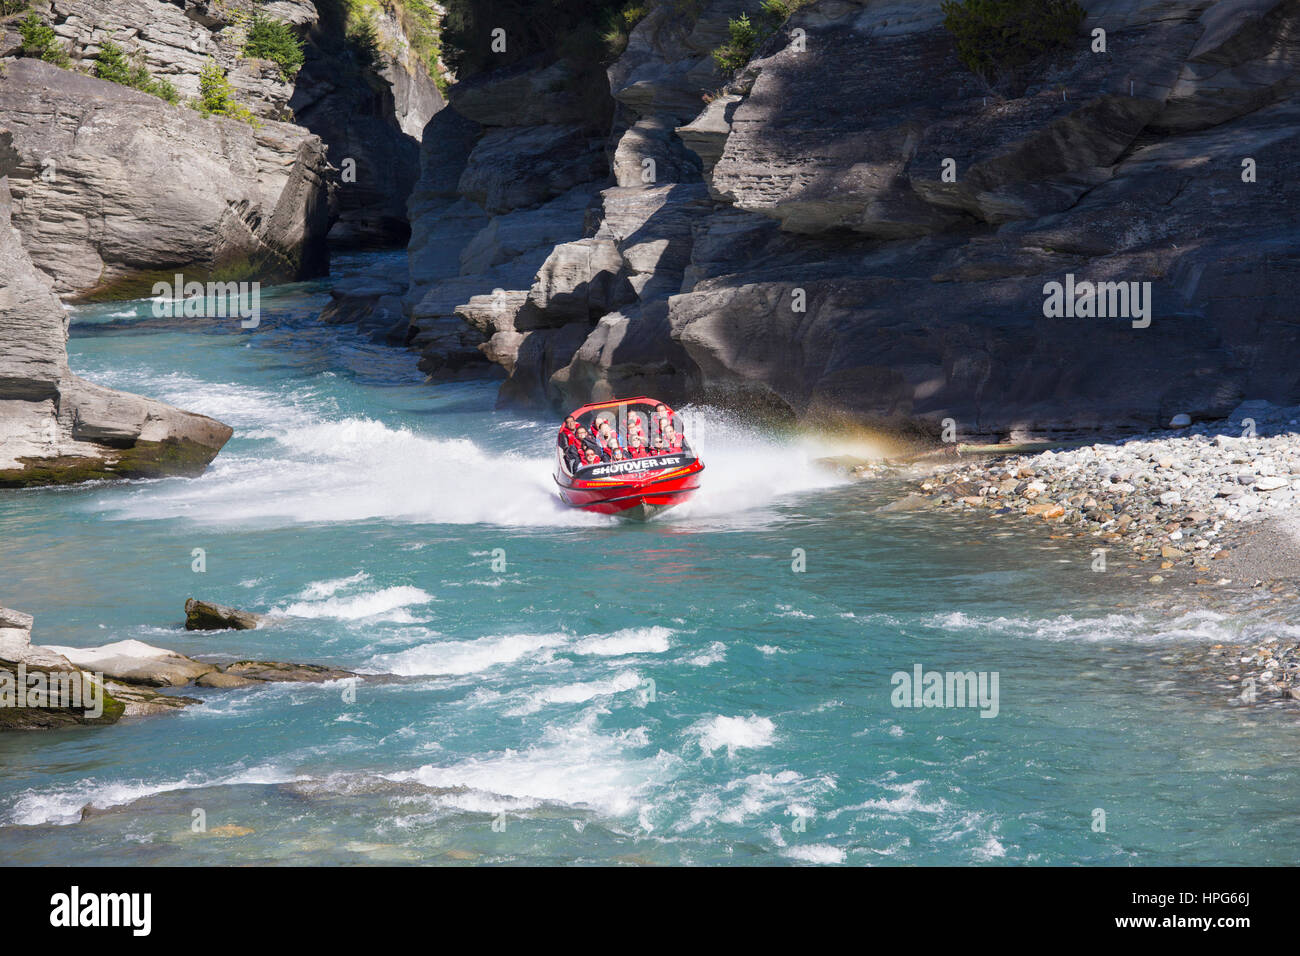 Queenstown, Otago, New Zealand. Shotover Jet boat emerging from narrow canyon on the Shotover River. Stock Photo